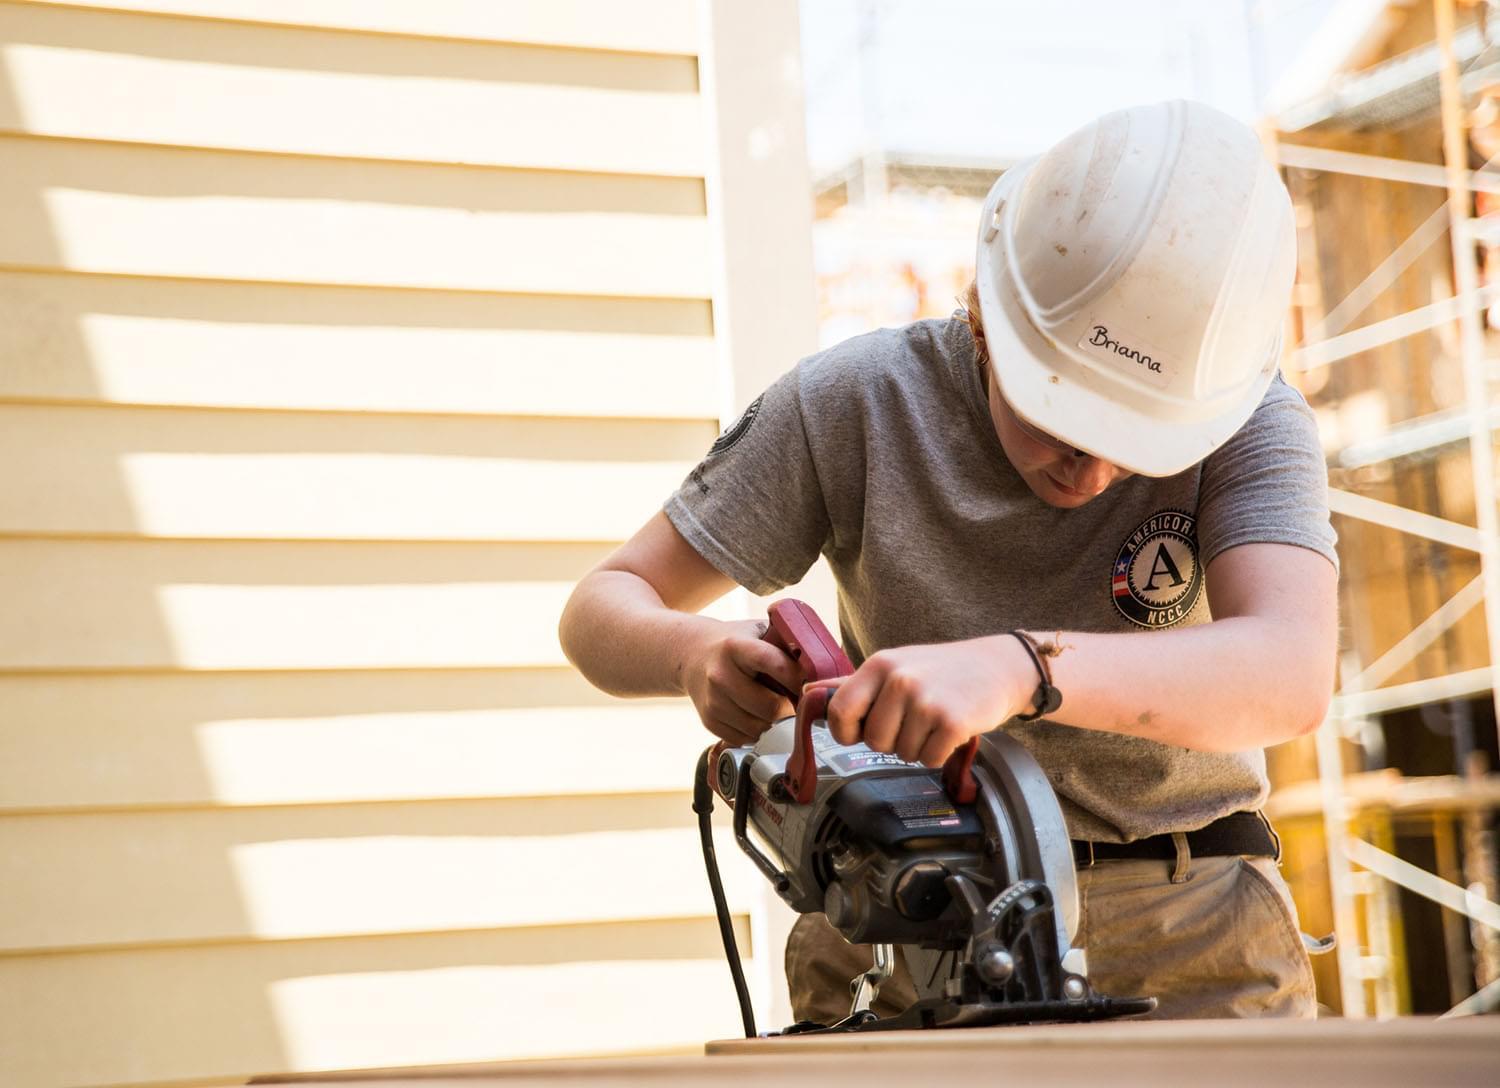 Woman wearing a hard hat using an electric sander